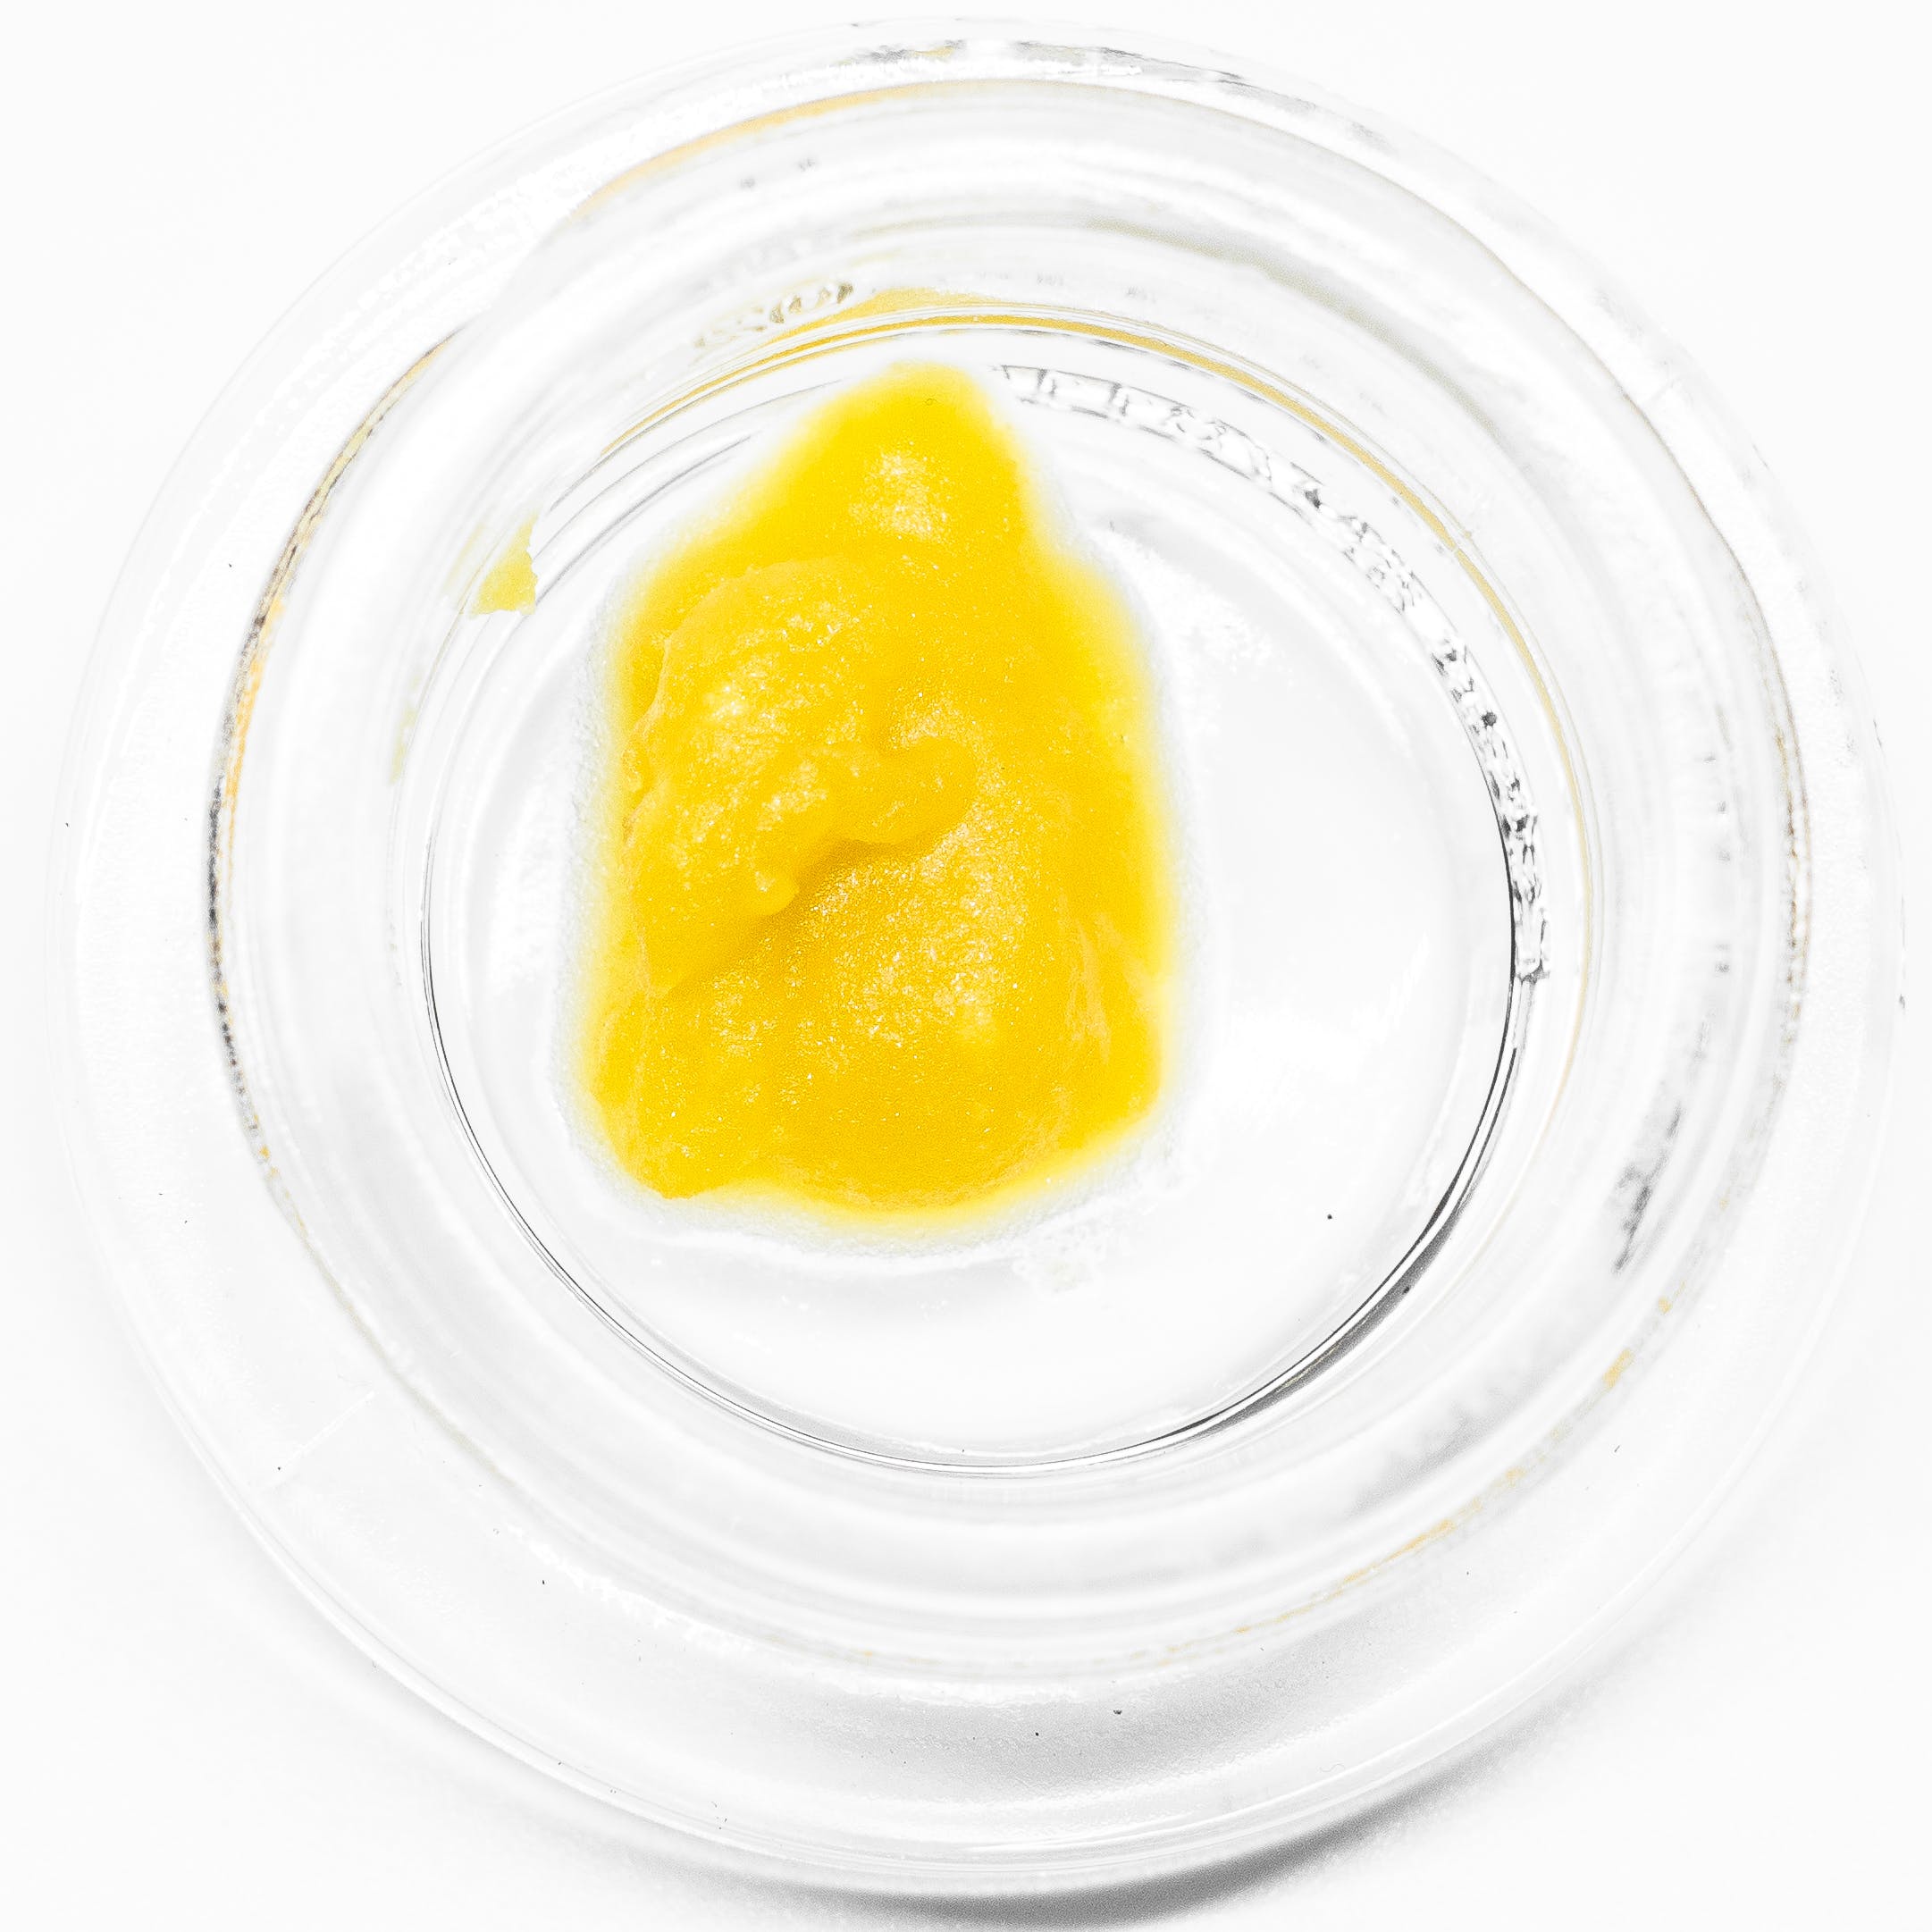 concentrate-2445-summit-alien-rocks-live-resin-h-66-67-25-buy-one-2c-get-one-50-25-off